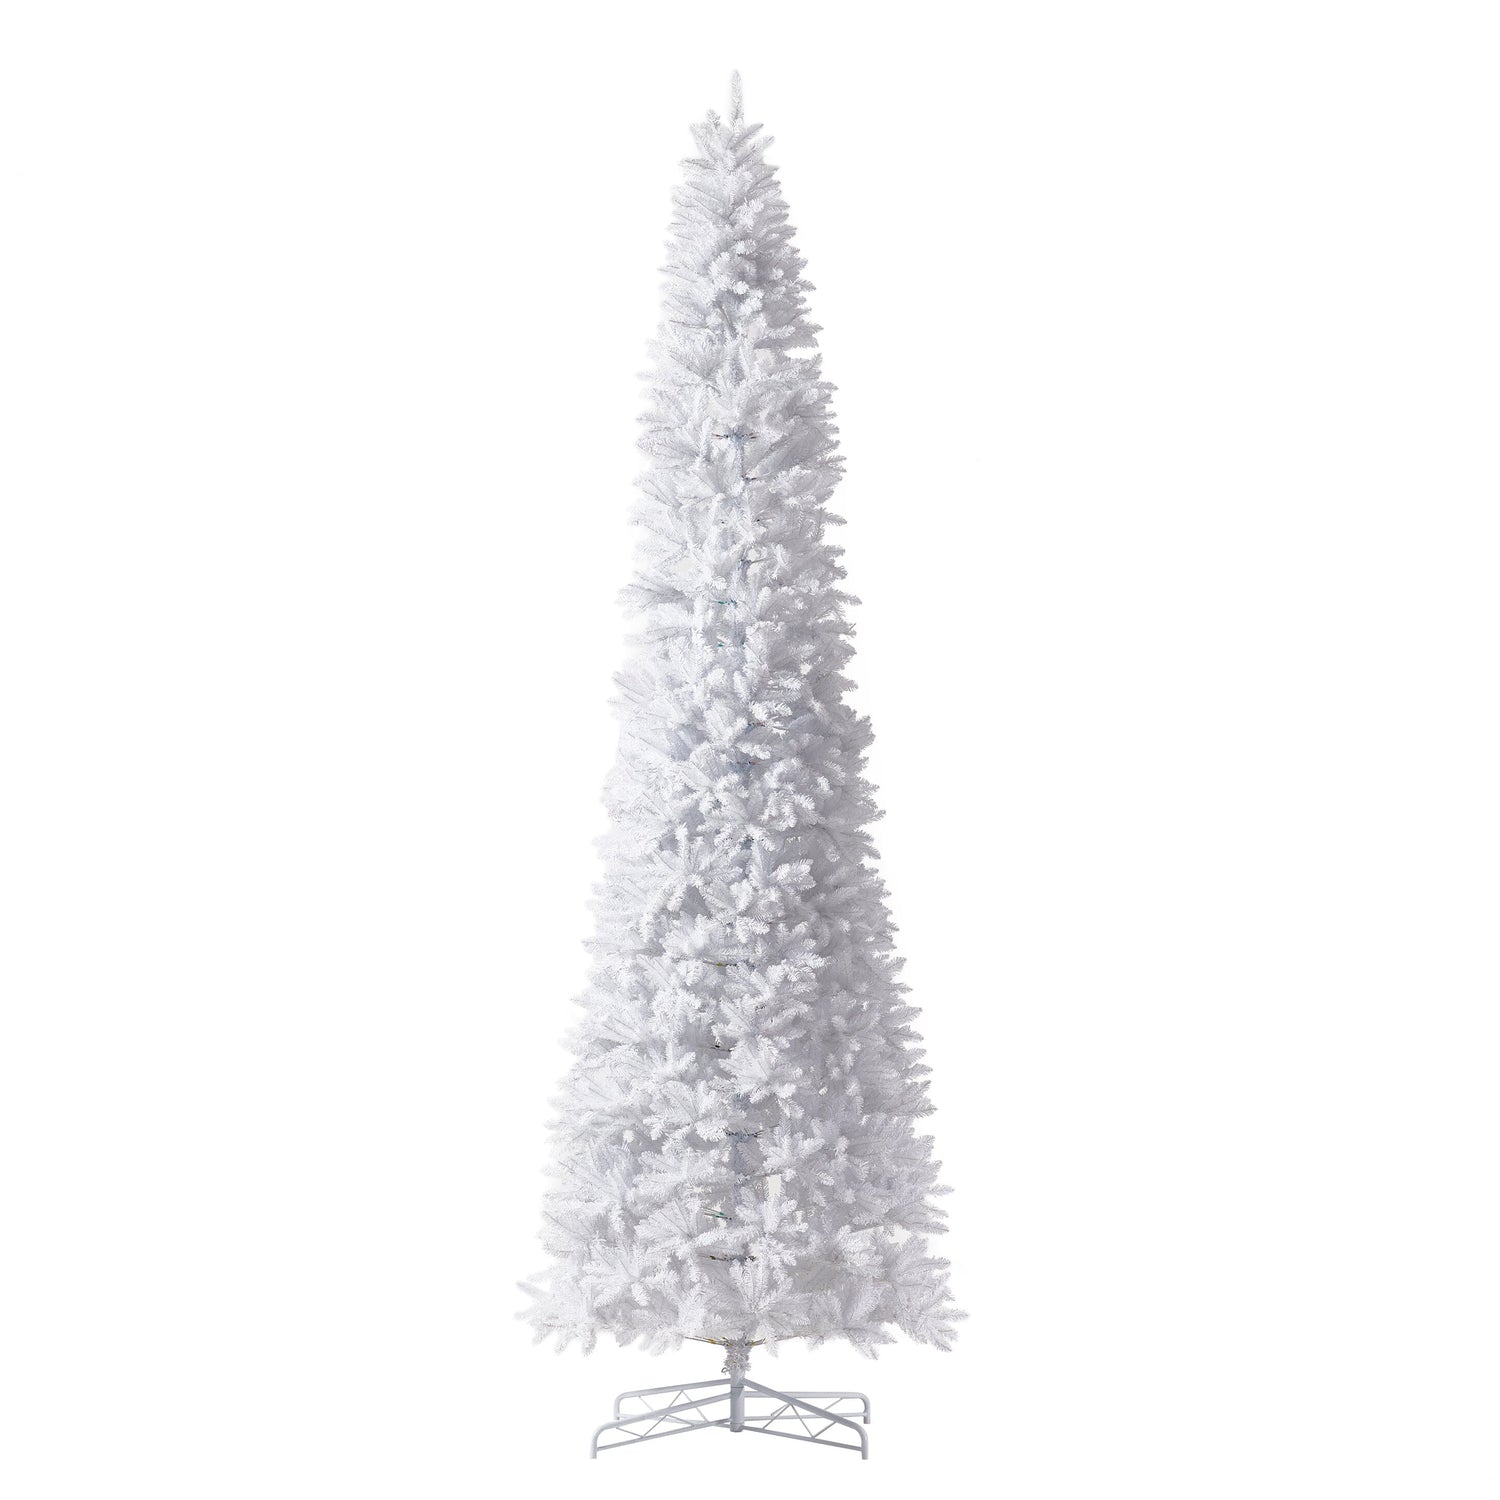 13’ Slim White Artificial Christmas Tree with 1350 Warm White LED Lights and 3924 Bendable Branches